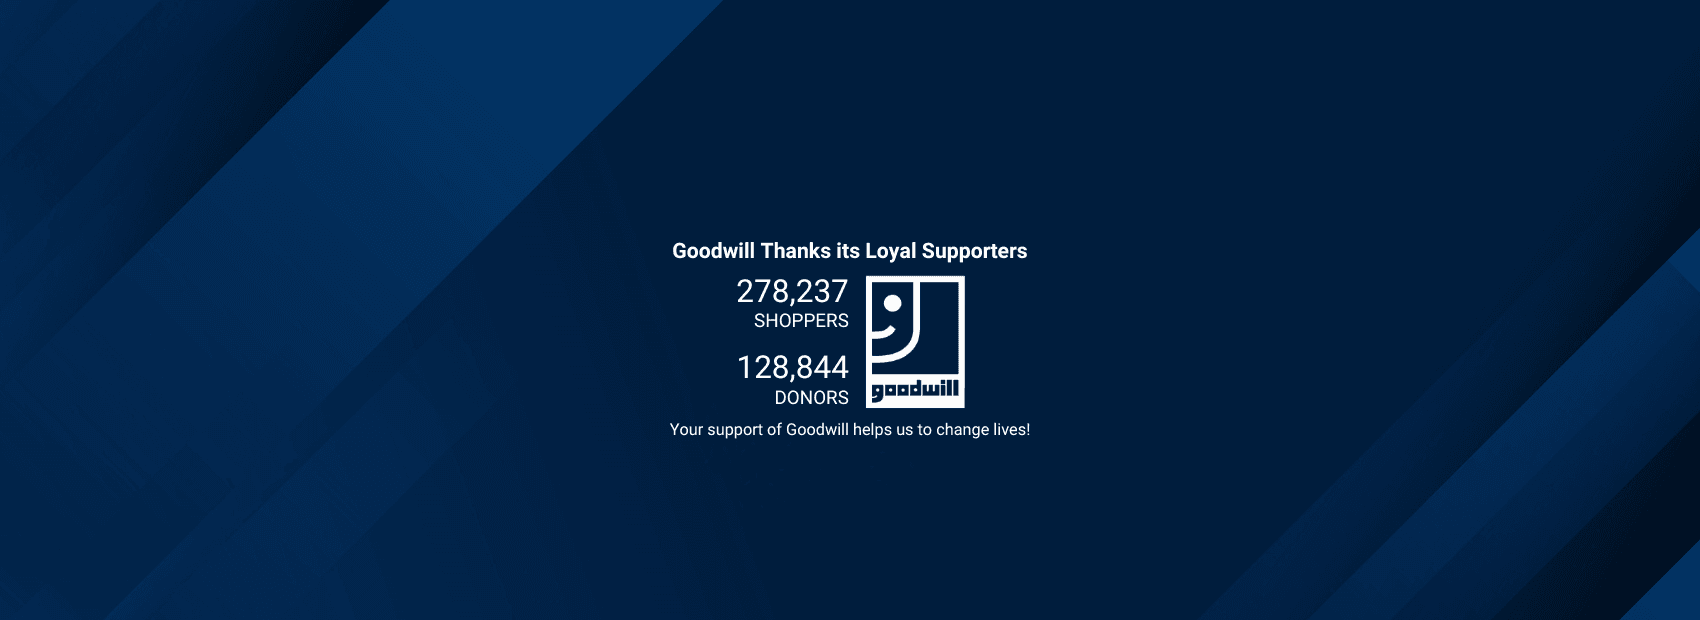 Goodwill Changes Lives!